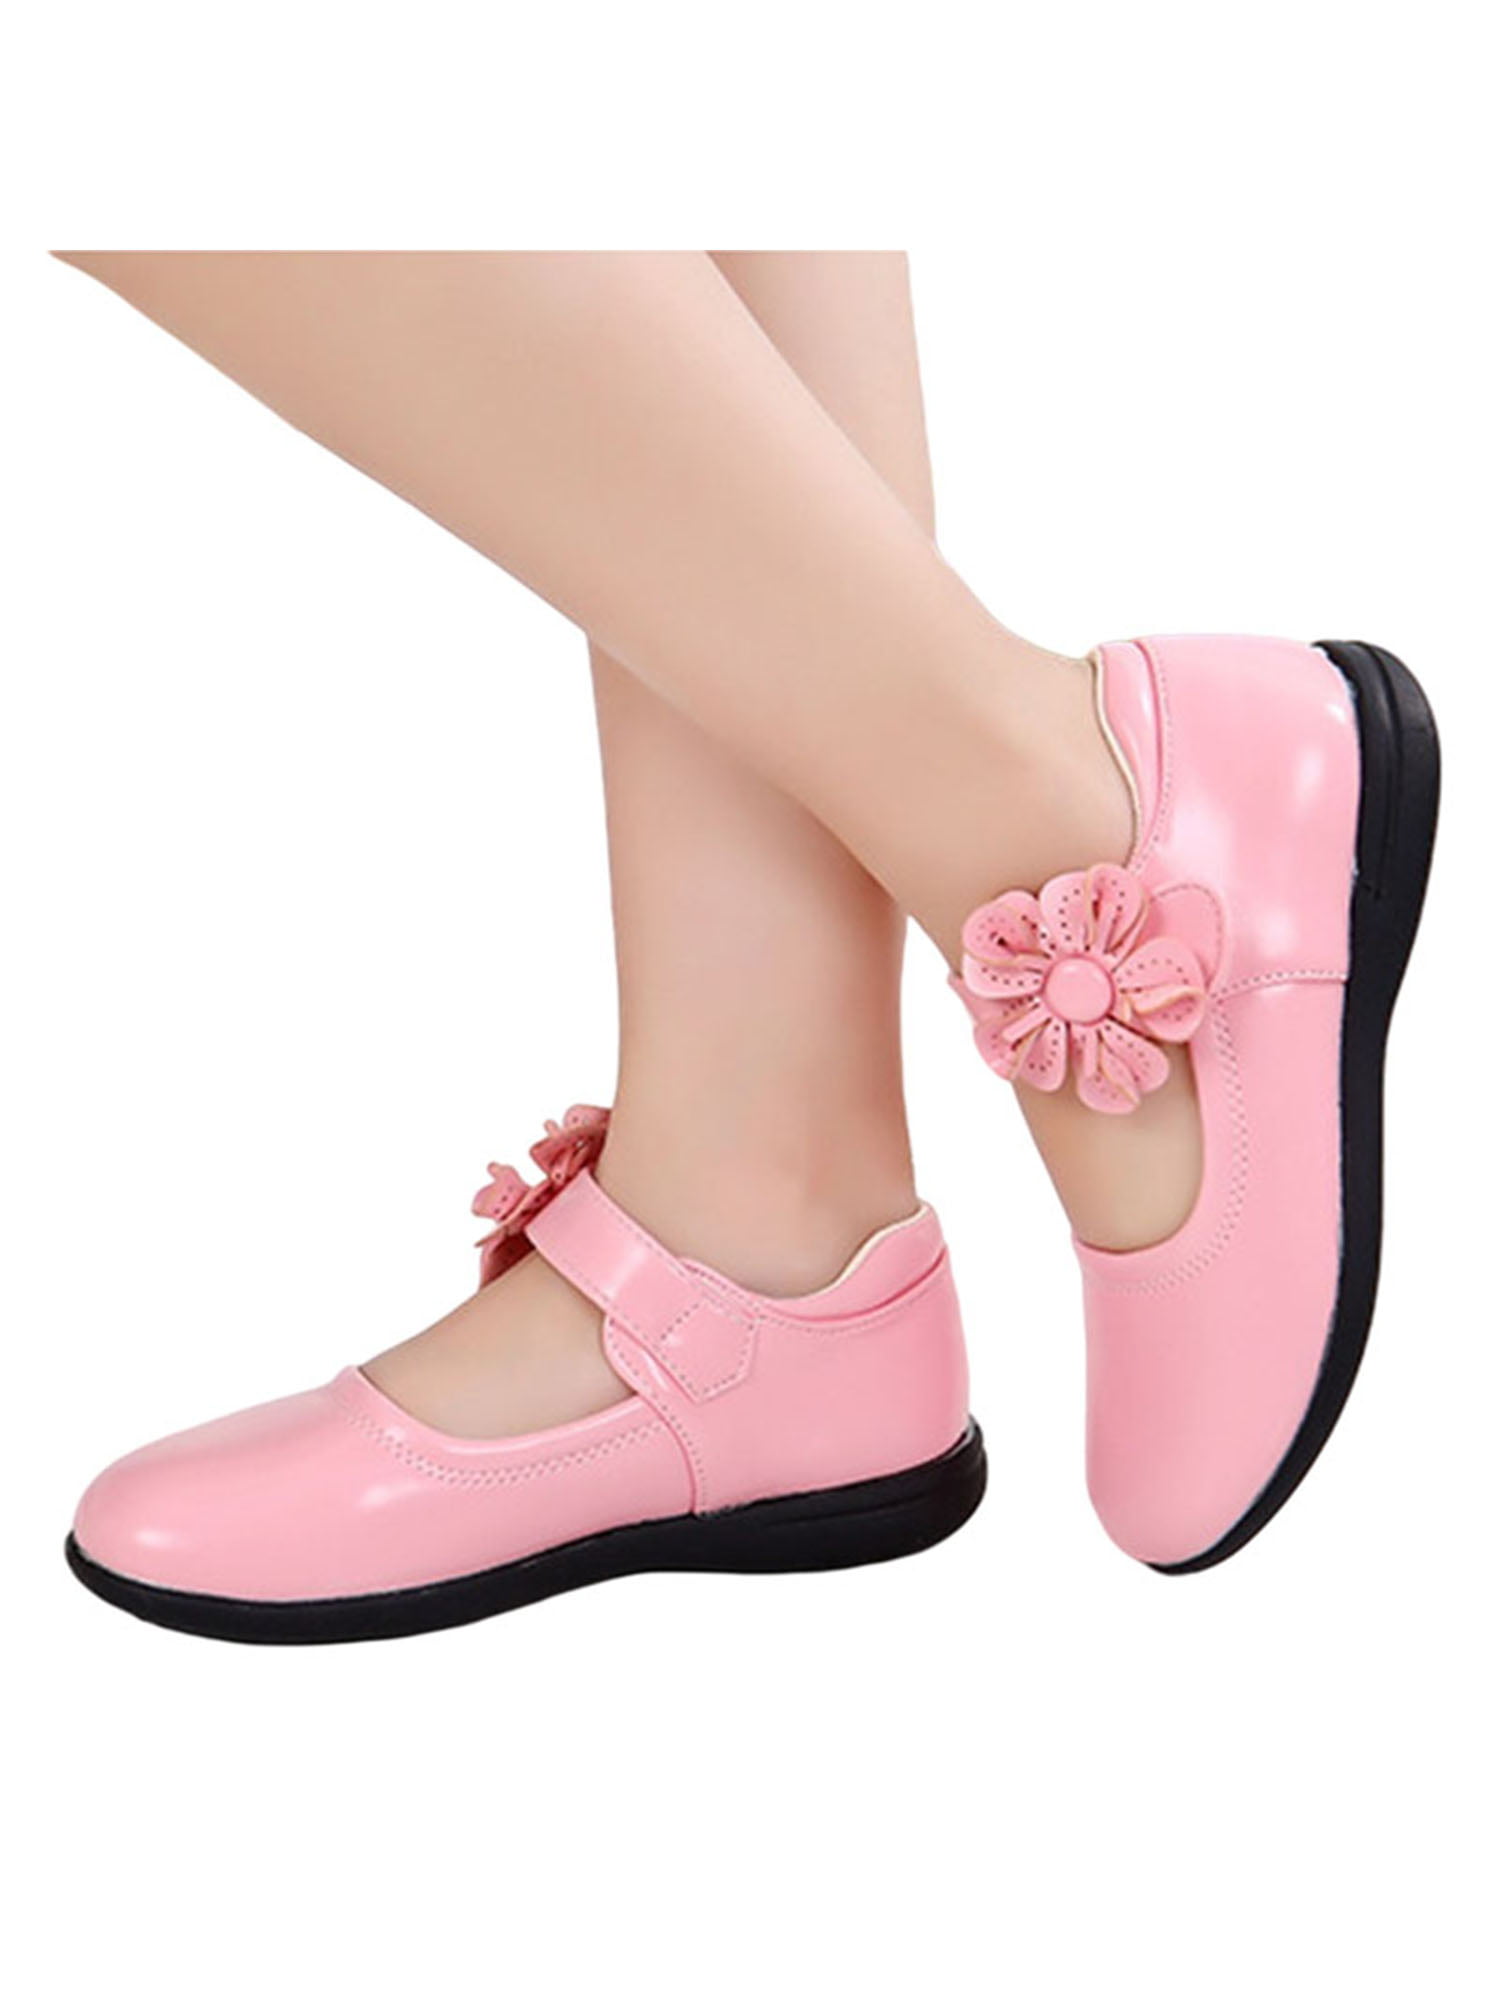 2019 Kids Girl Fashion Shoes Toddler Baby Dance Party Shoes Children Pretty Shoe 